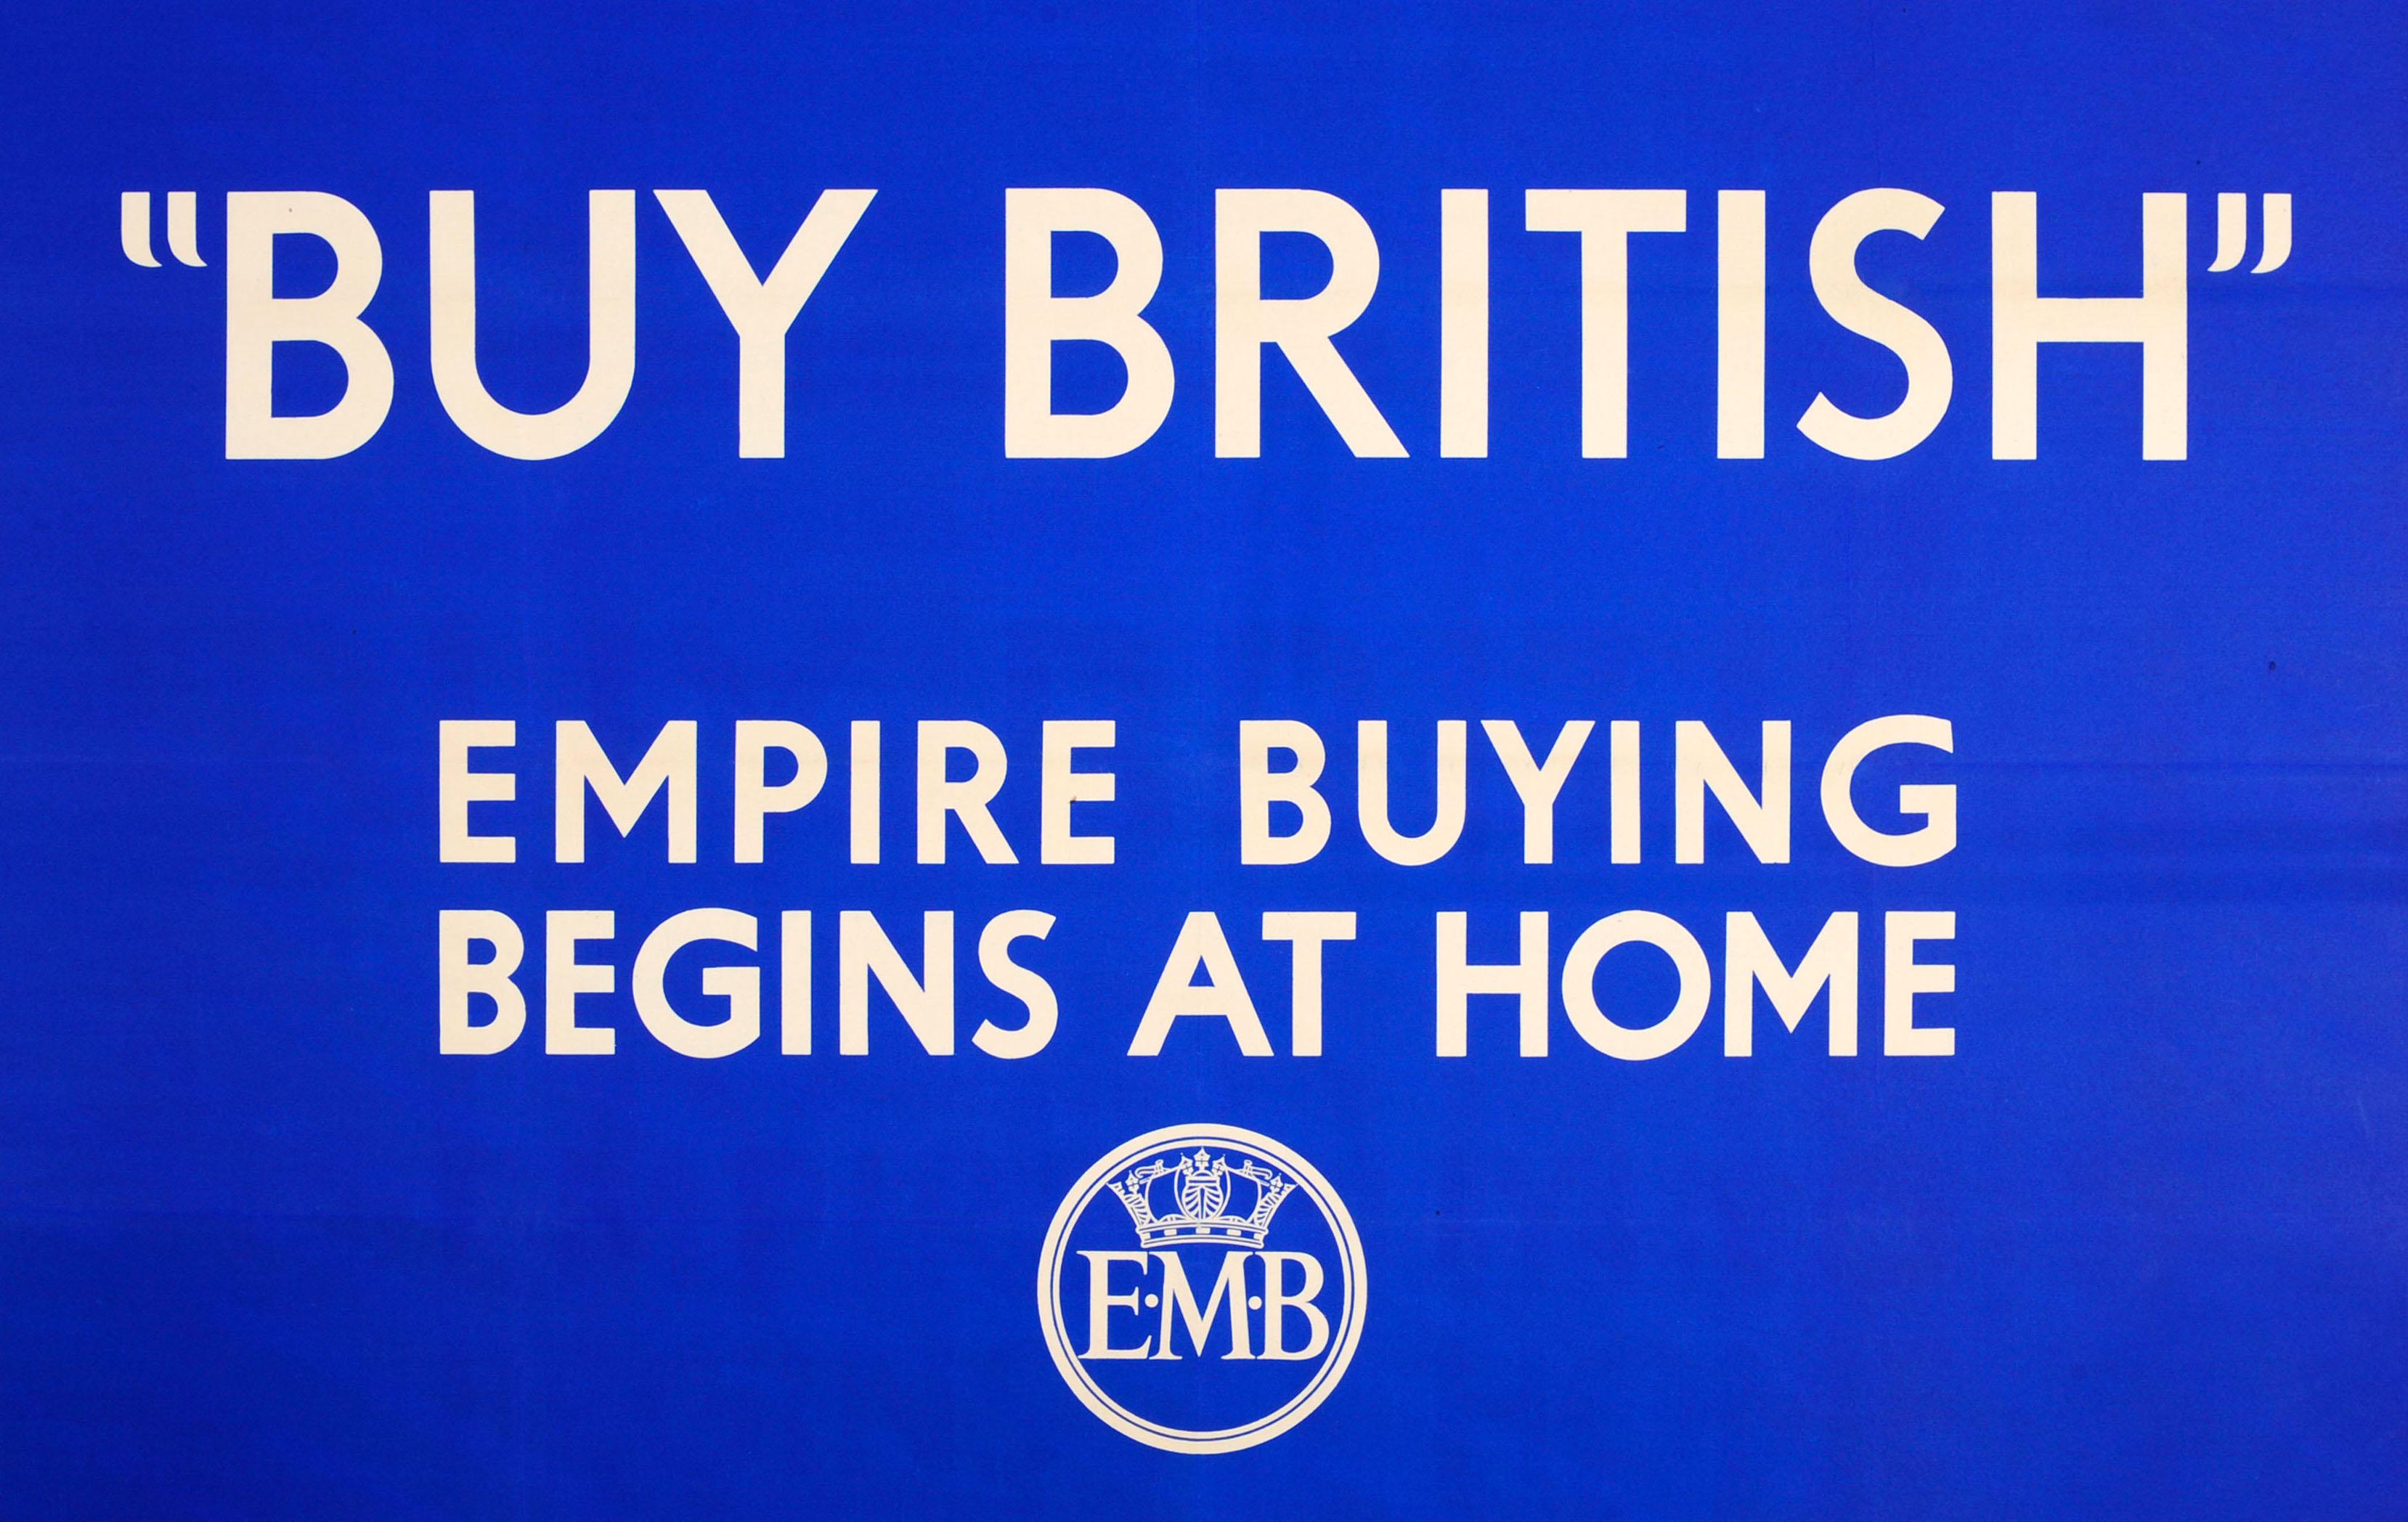 Original Vintage Advertising Poster Buy British Empire Buying Begins At Home EMB - Print by Unknown